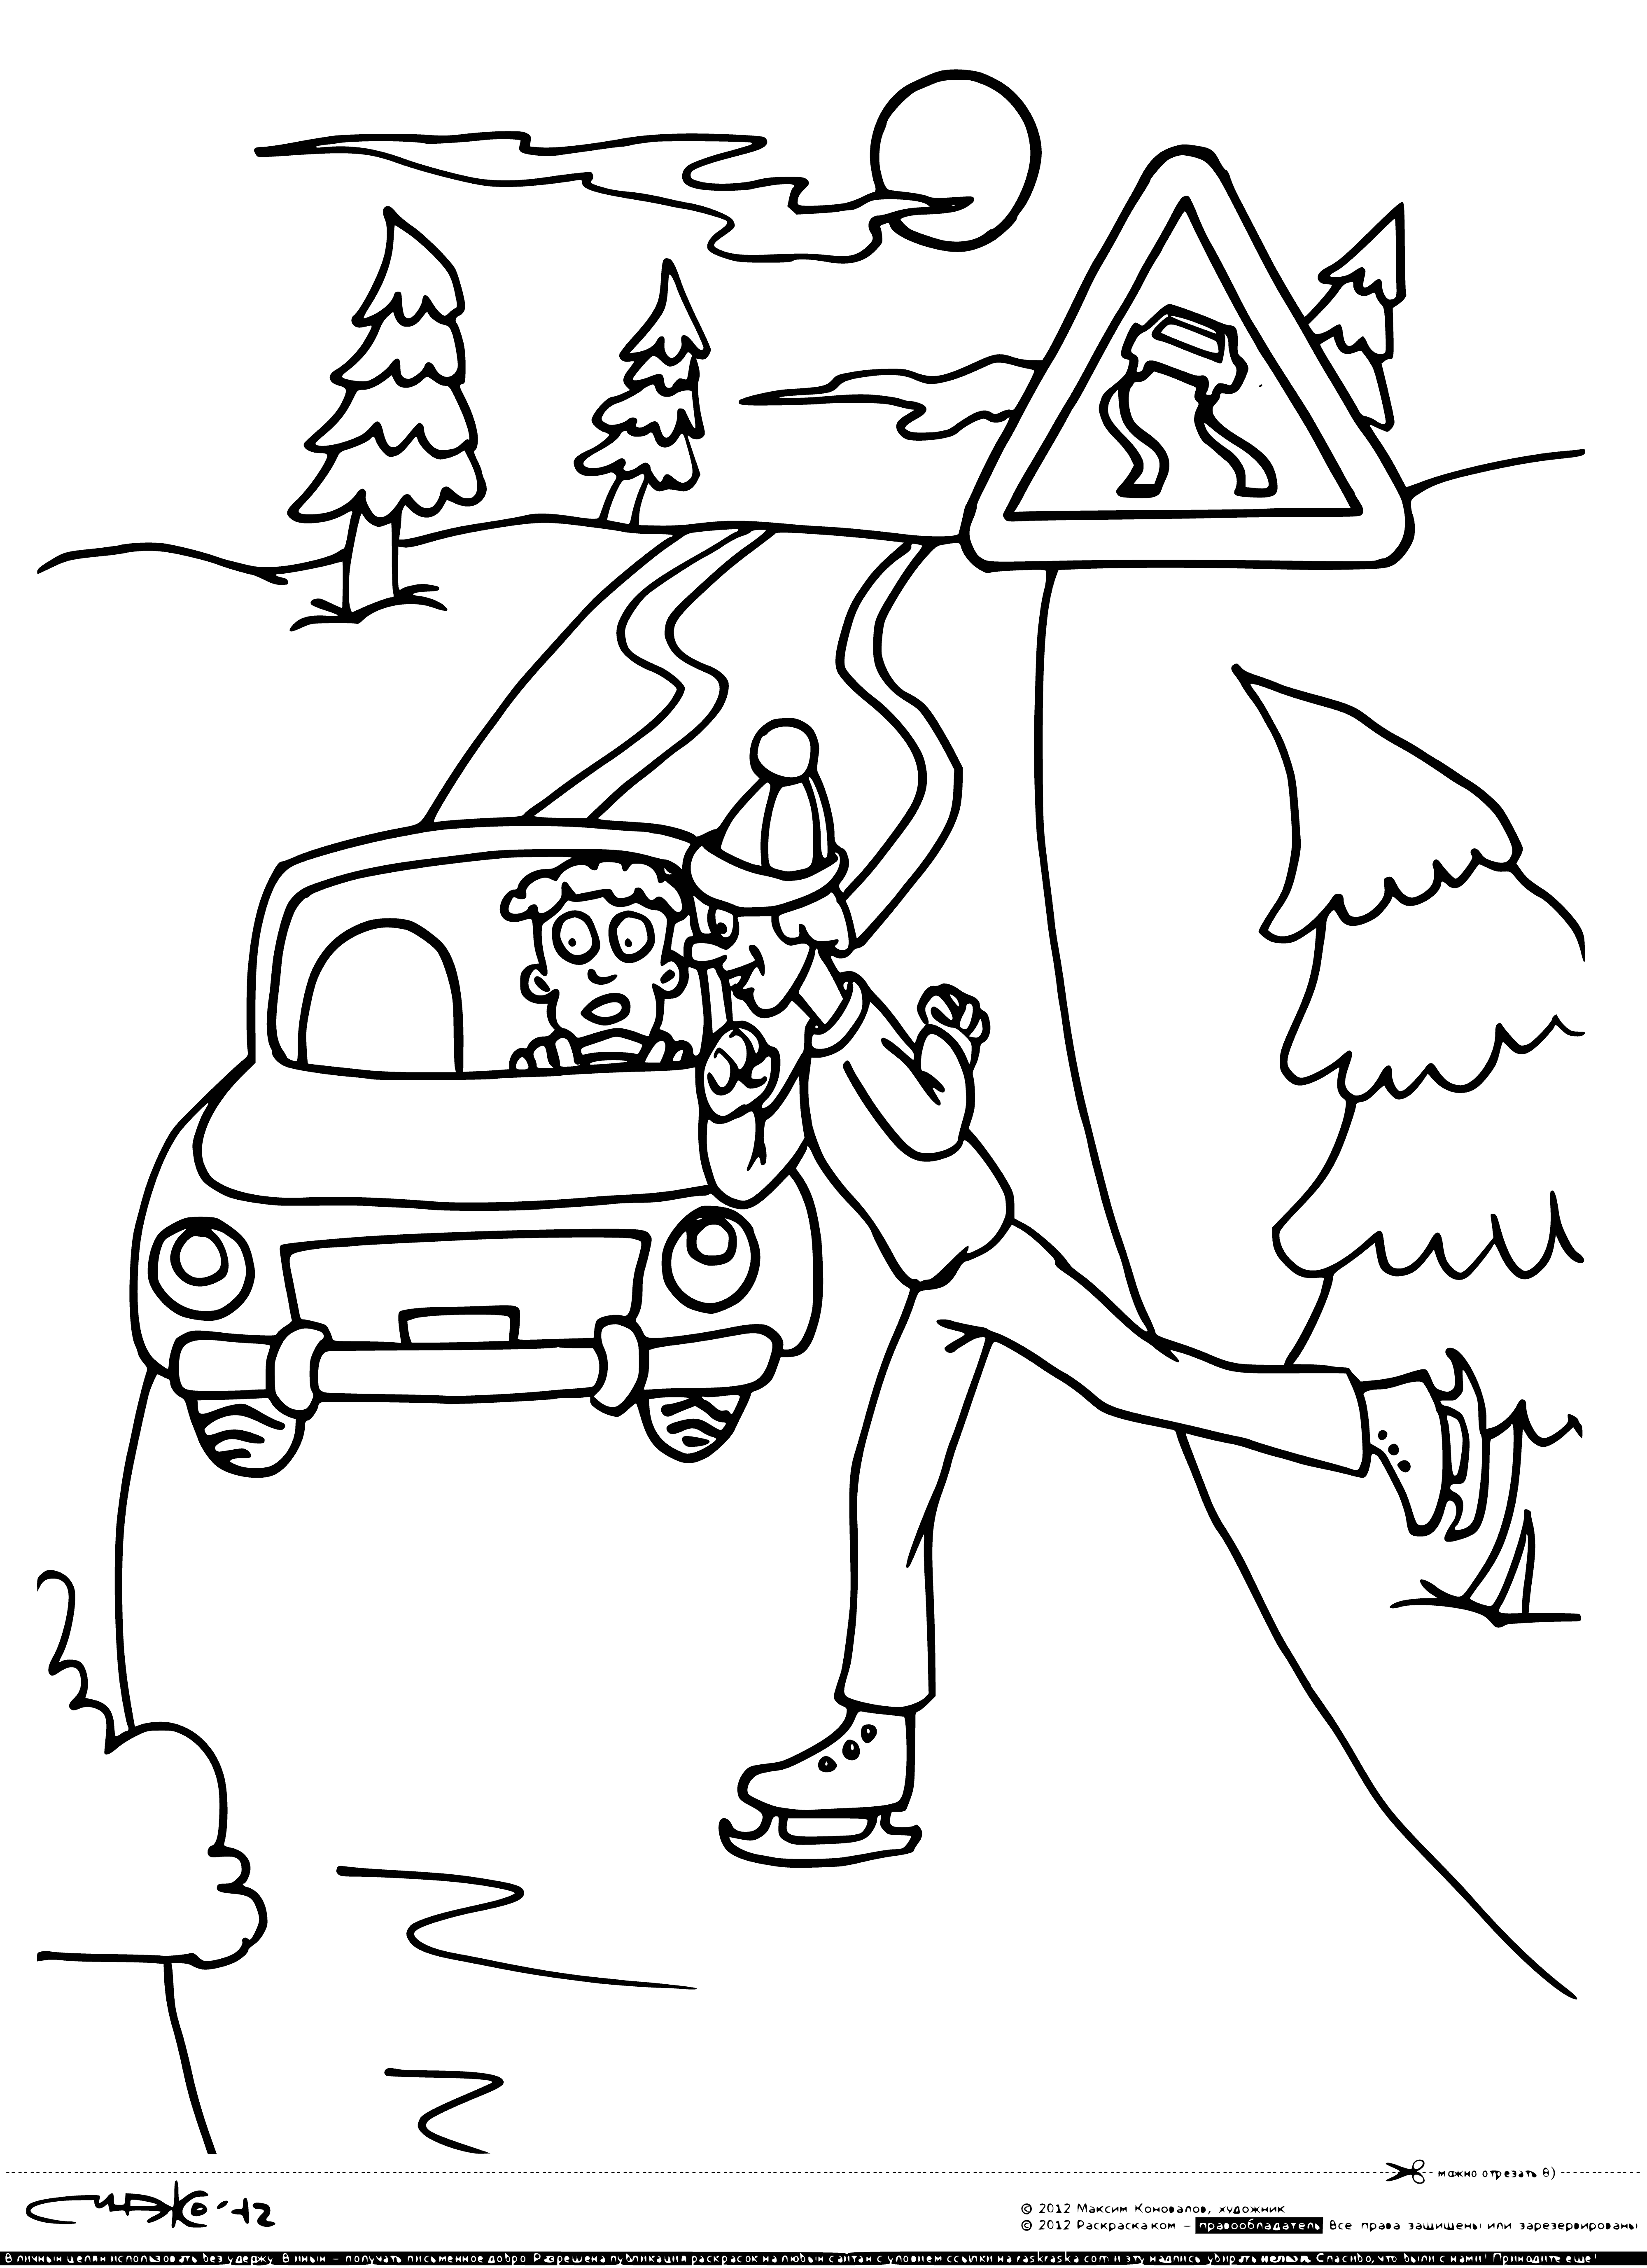 Slippy road coloring page